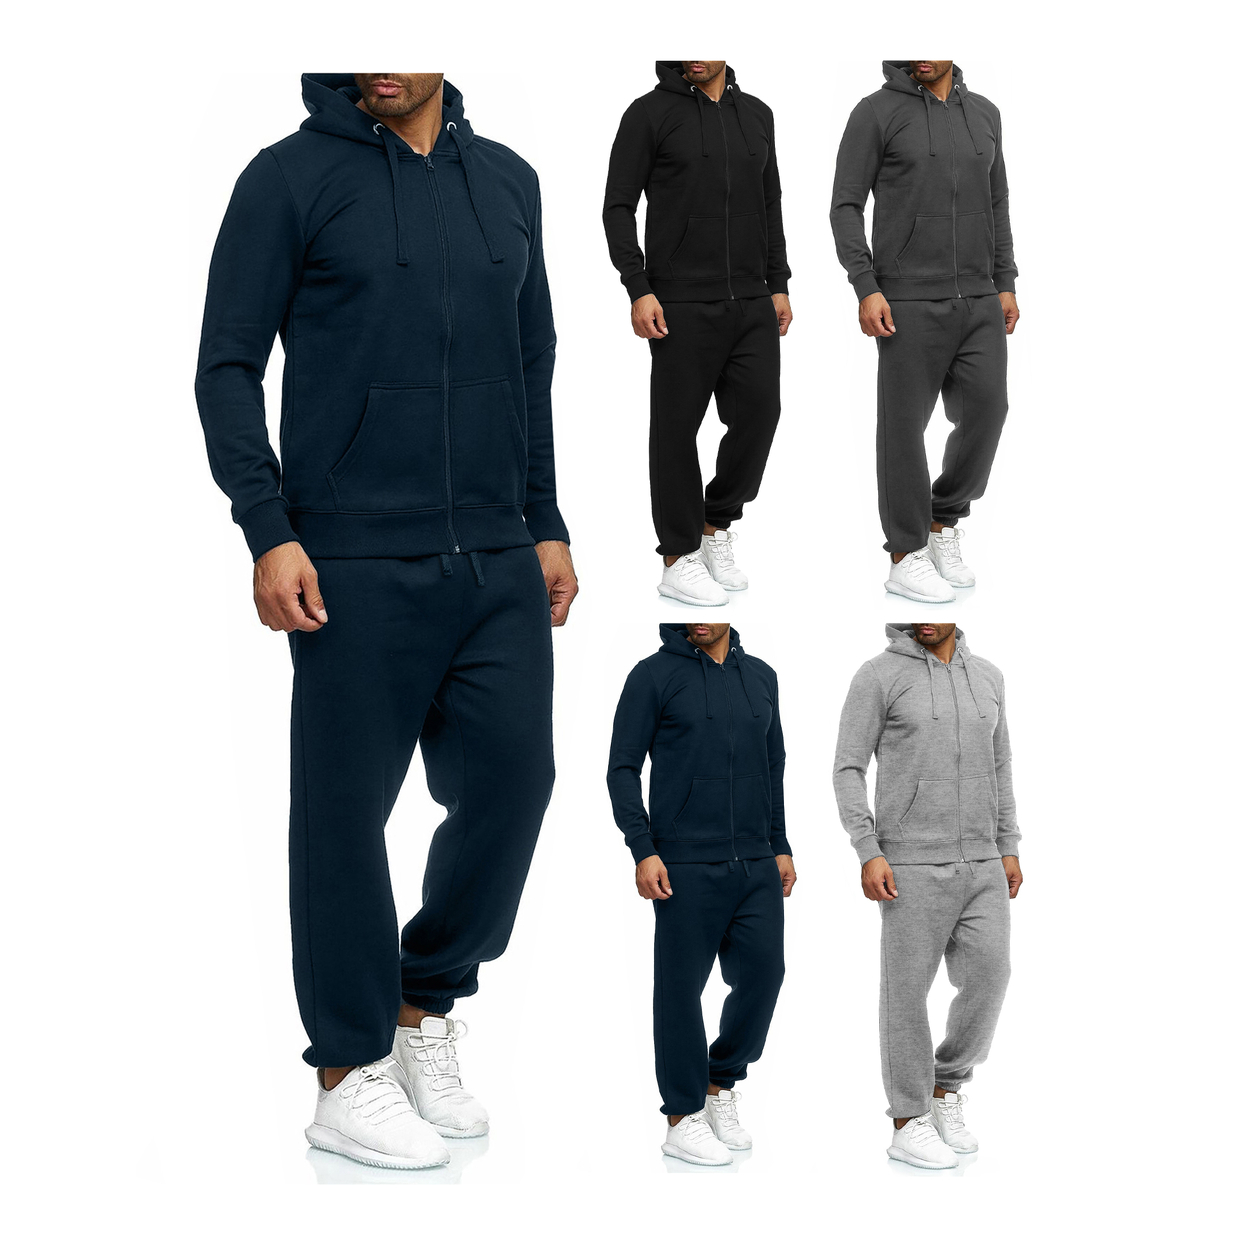 Men's Casual Big & Tall Athletic Active Winter Warm Fleece Lined Full Zip Tracksuit Jogger Set - Grey, Xx-large